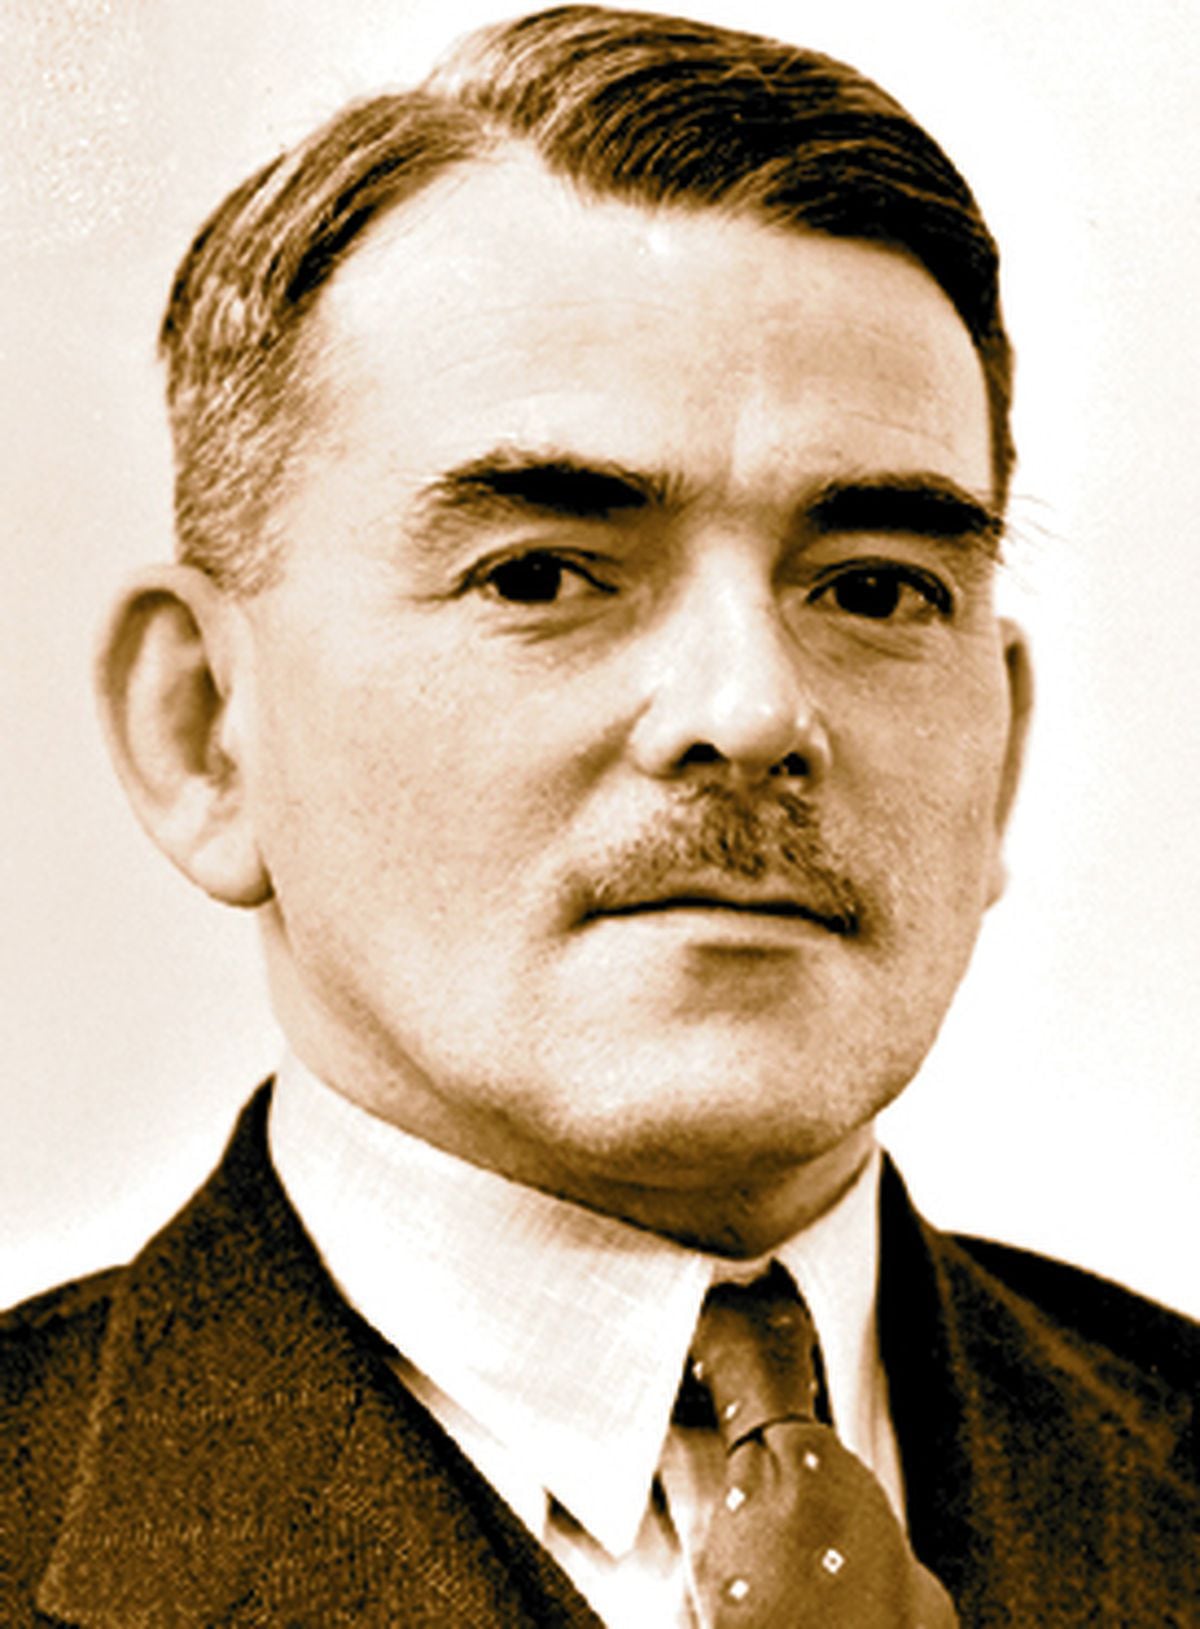 Sir Frank Whittle, who patented the first jet engine